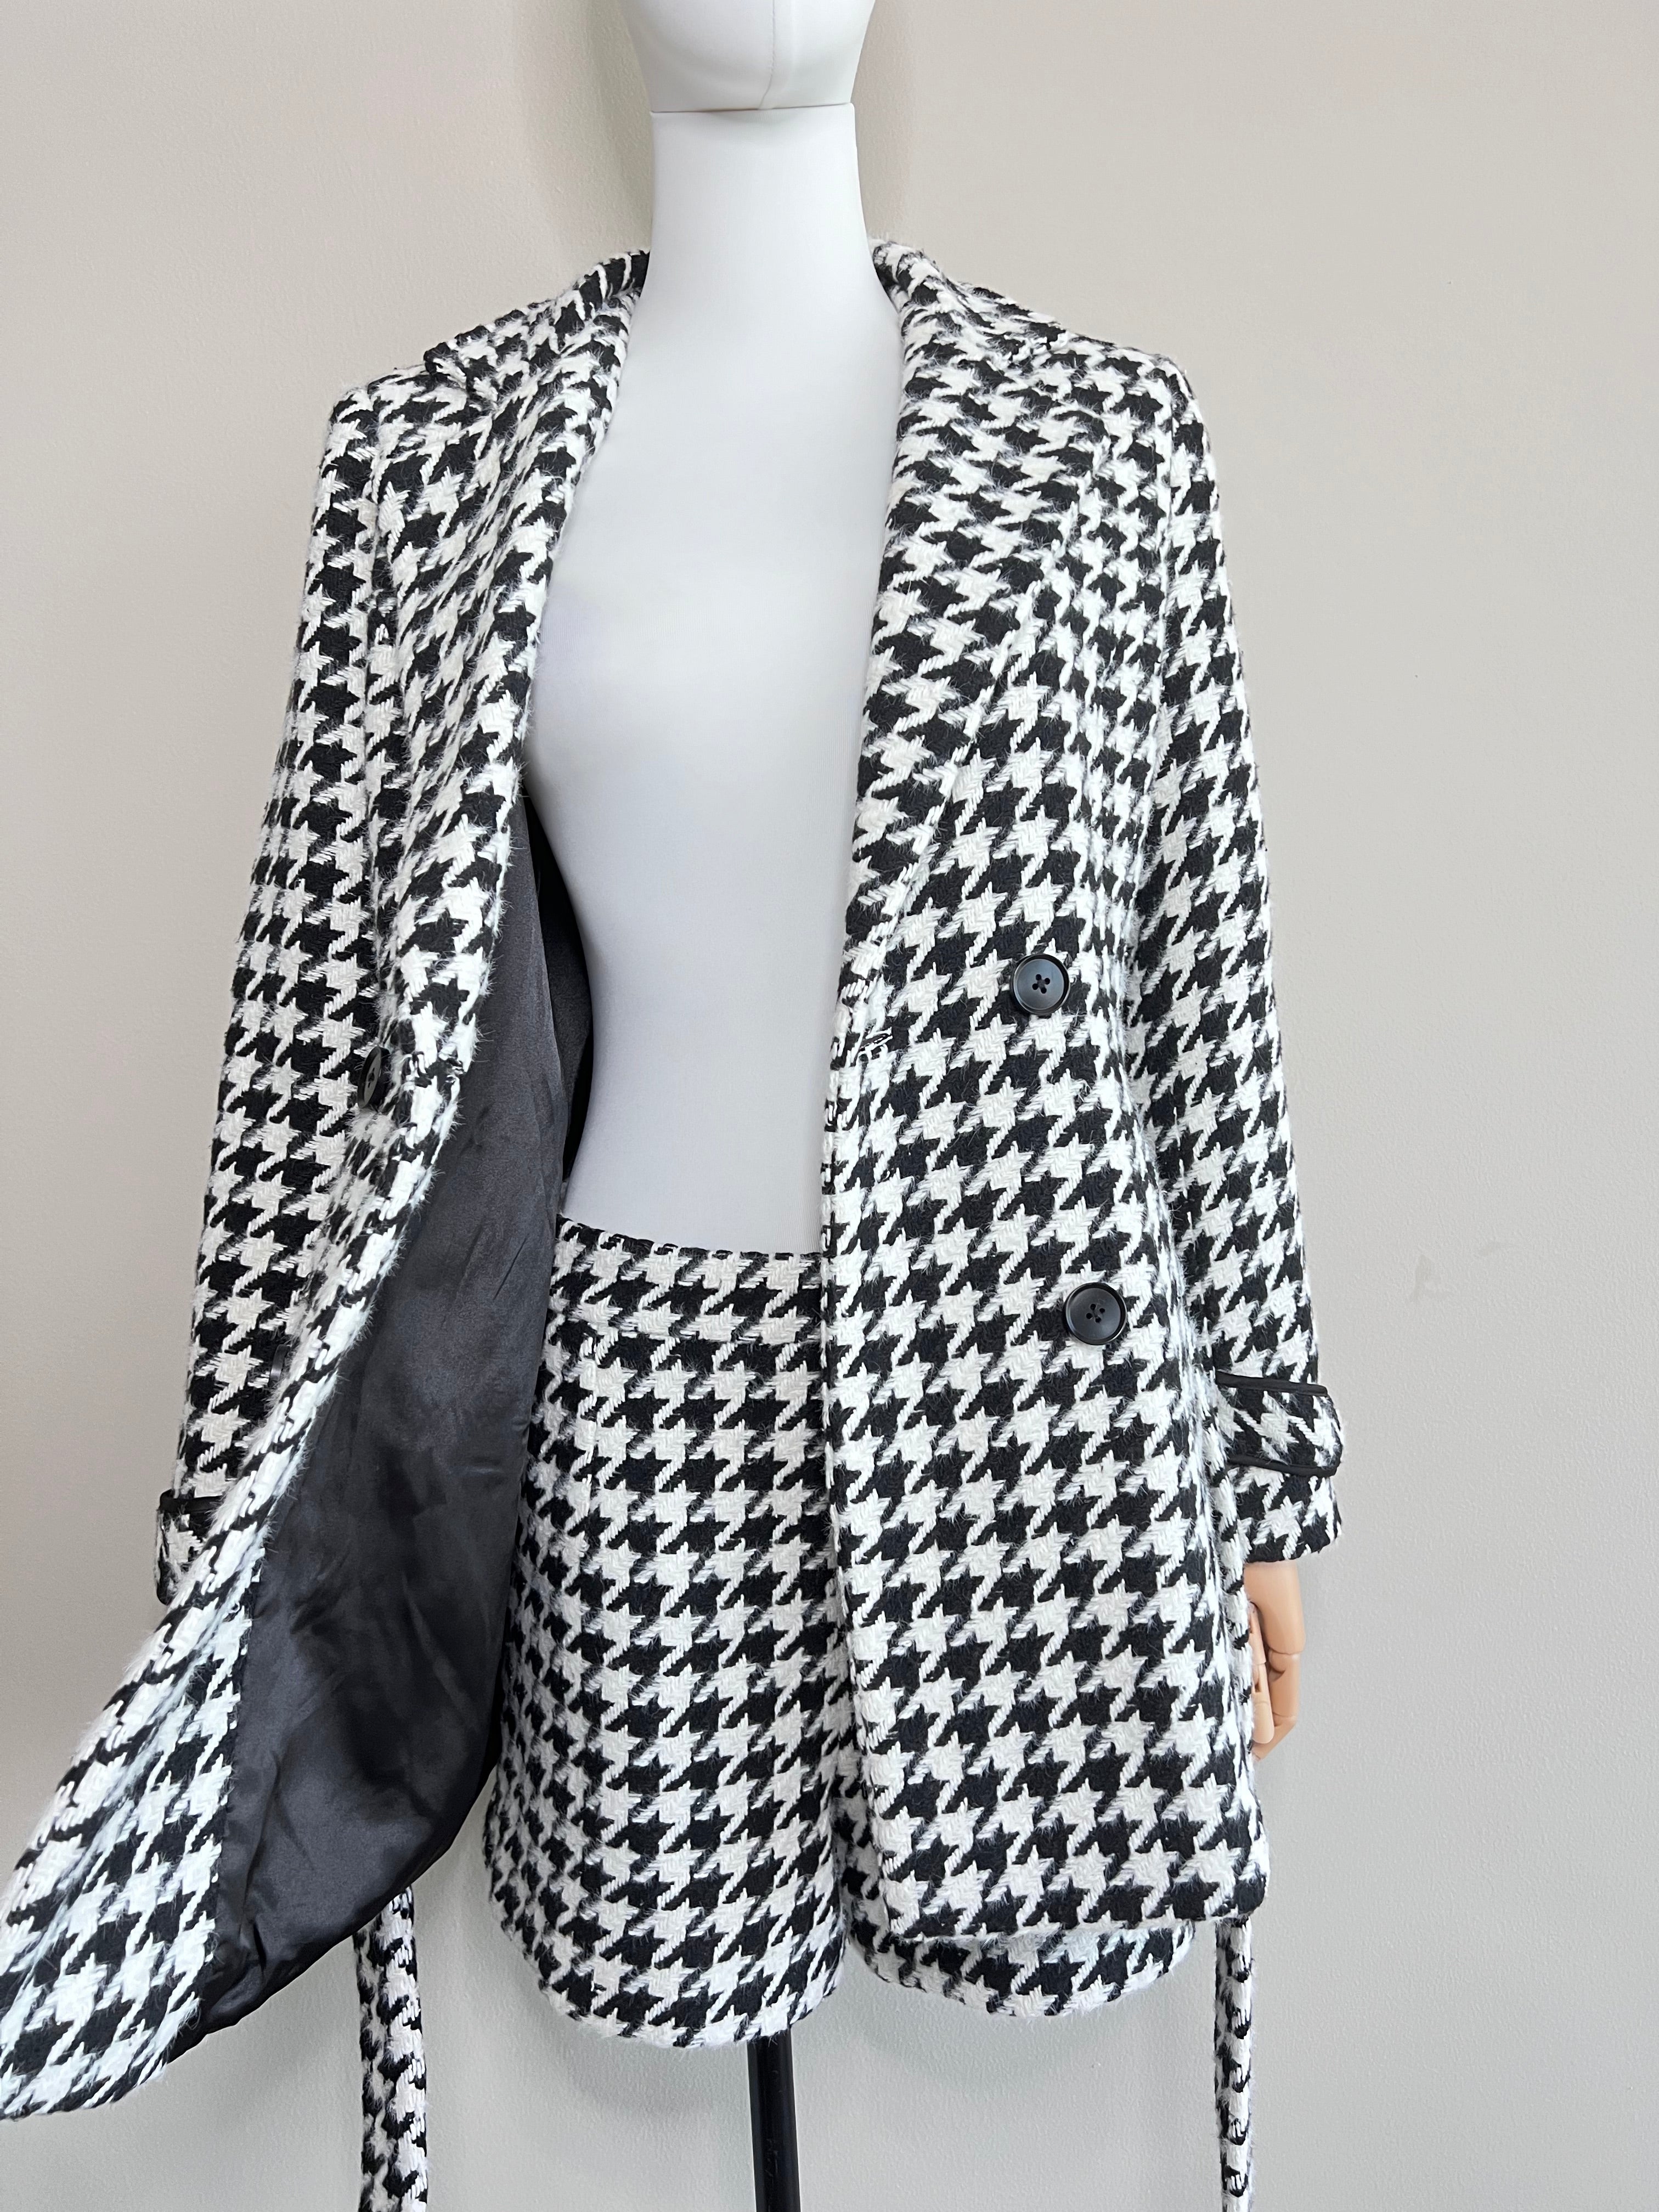 A set of houndstooth double button print suit & shorts